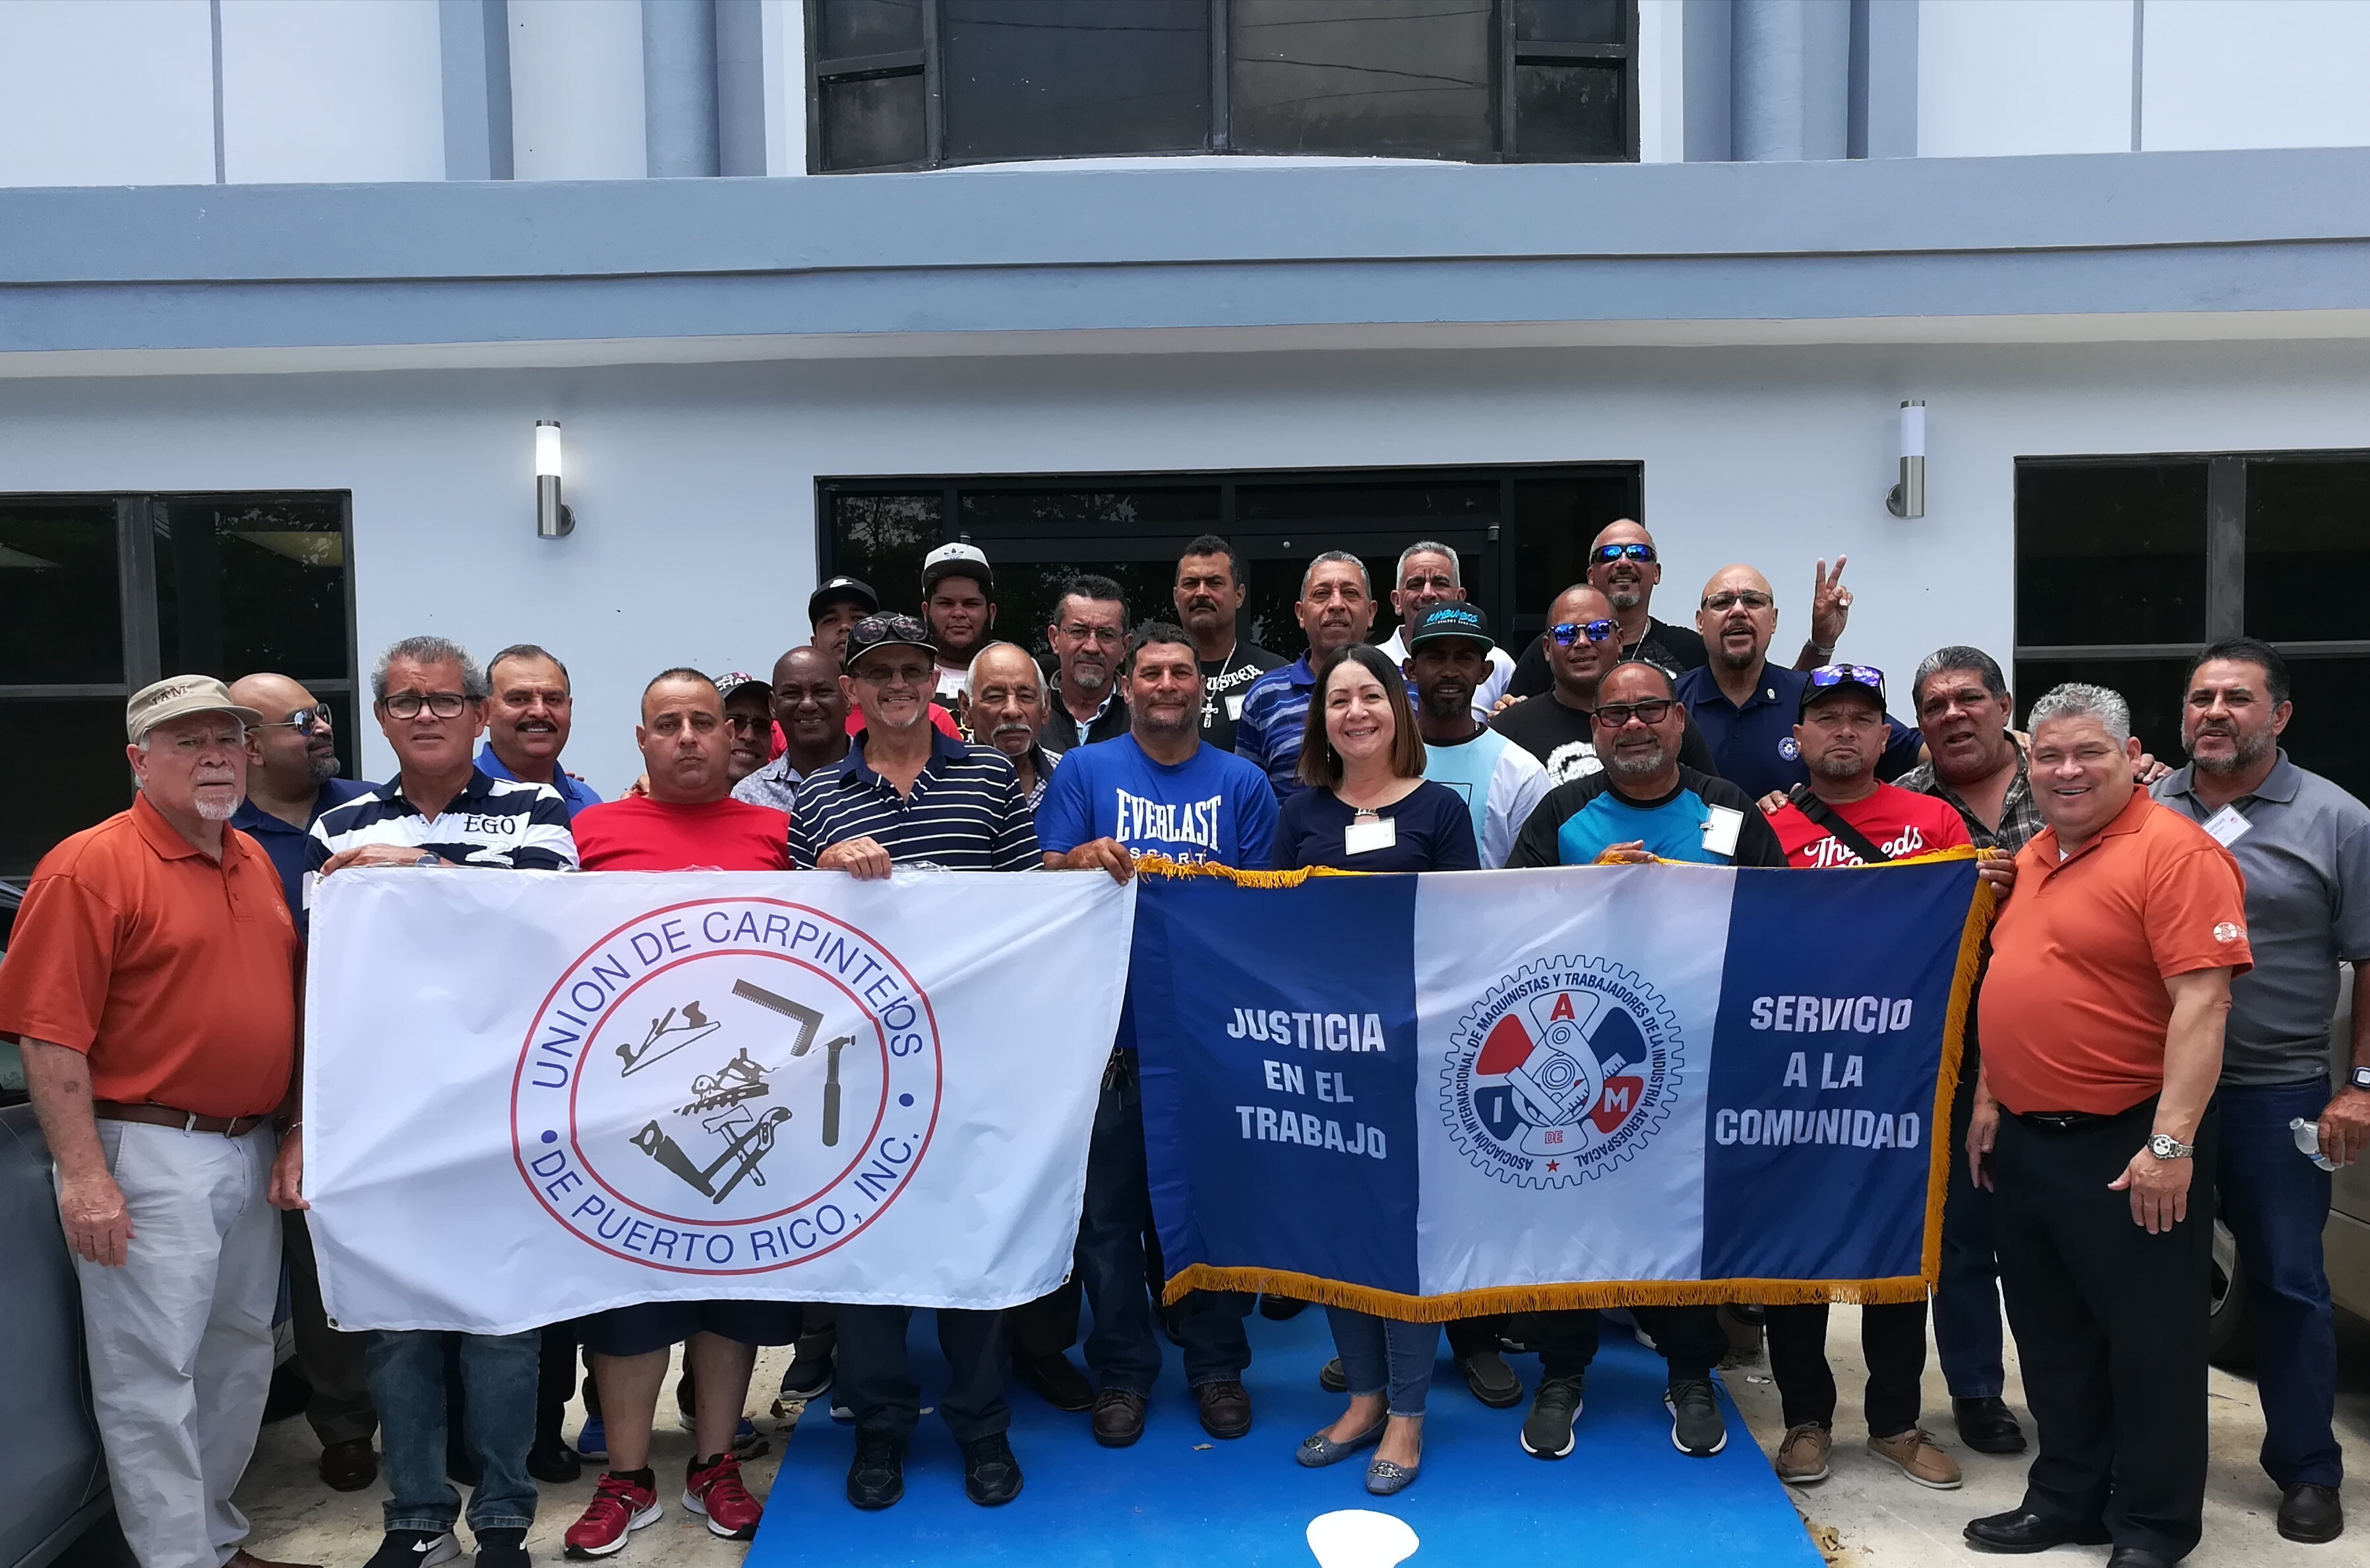 Machinists and Carpenters Constructing Labor Solidarity in Puerto Rico